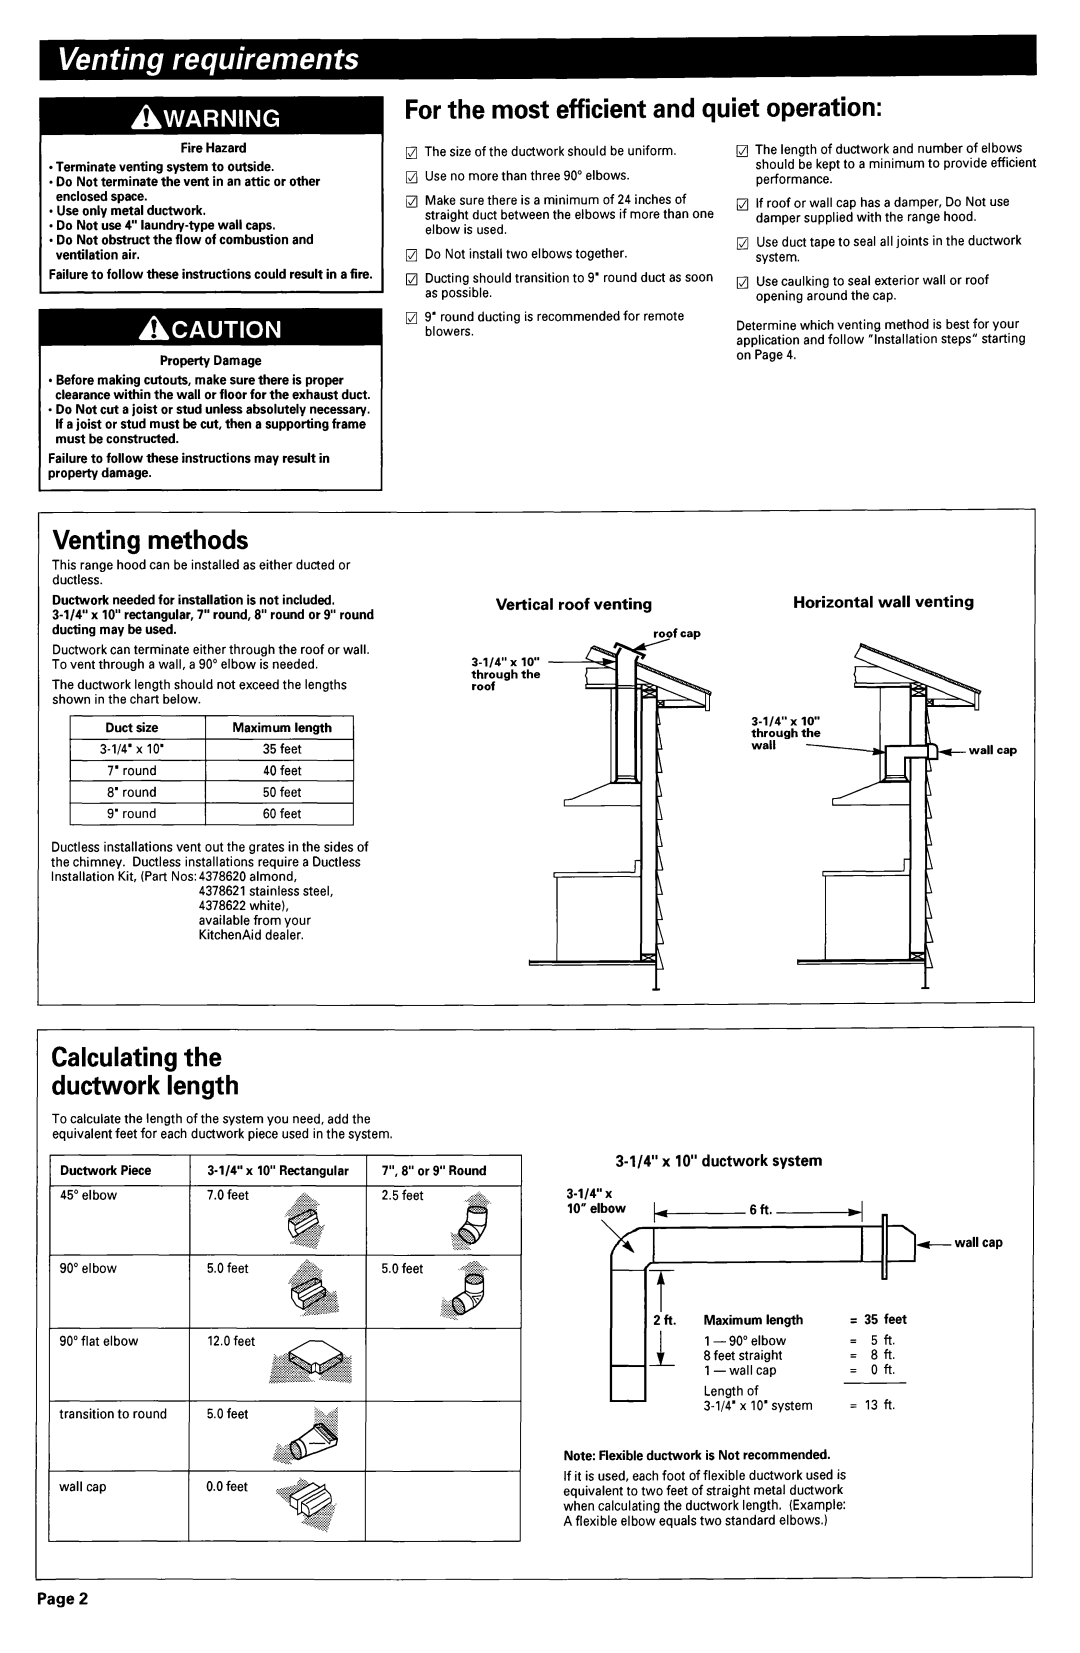 KitchenAid 883297 For the most efficient and quiet operation, Venting methods, Calculating the ductwork length, Horizontal 